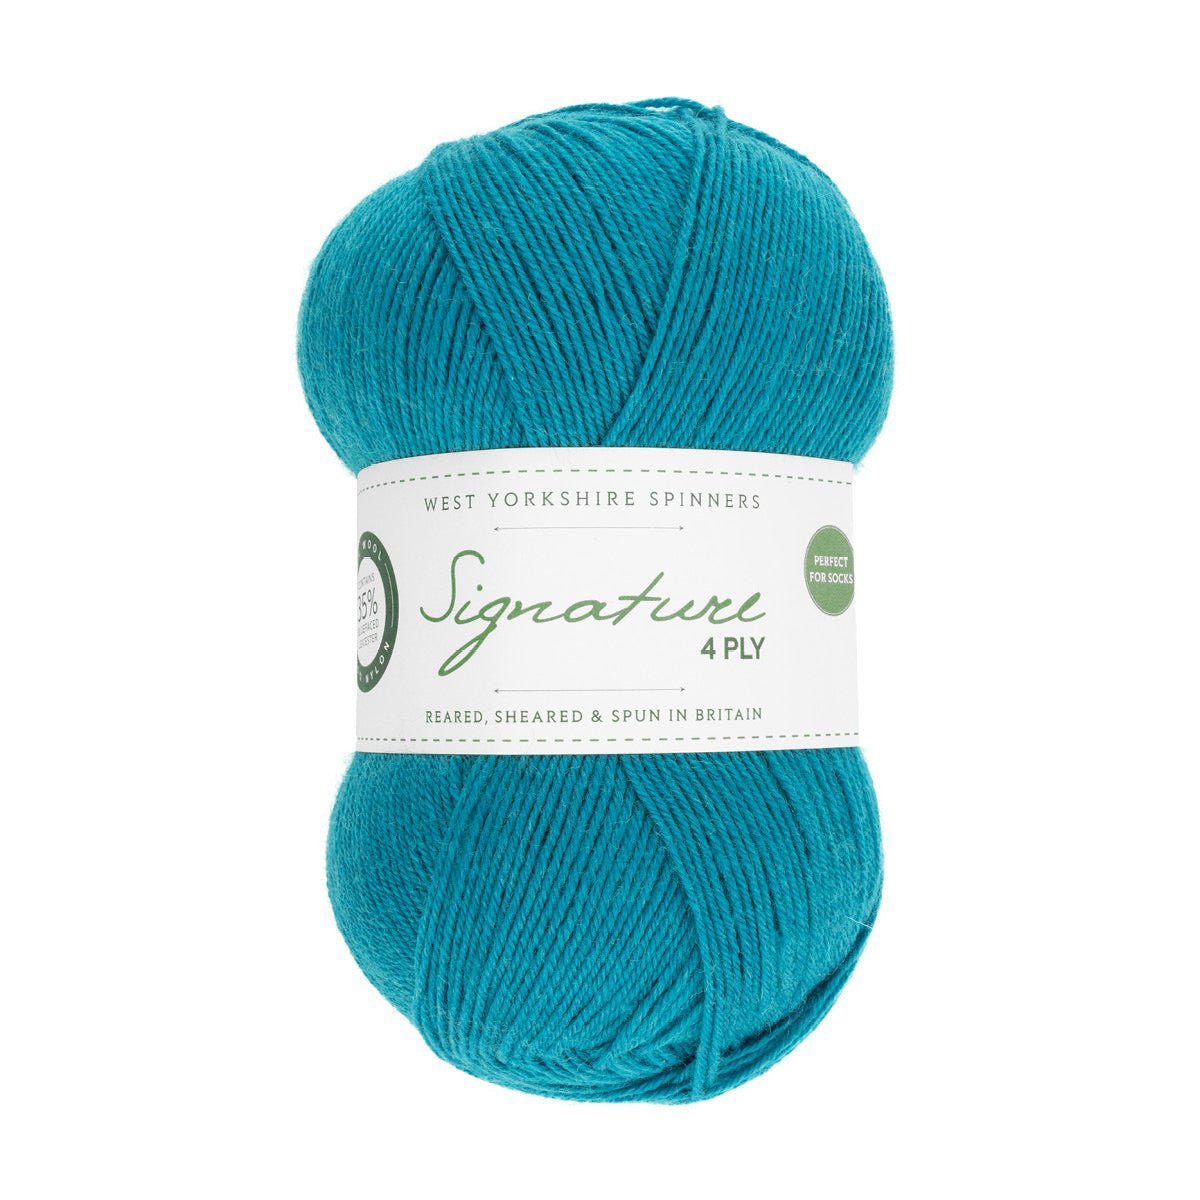 SIGNATURE 4PLY 365-Blueberry Bonbon - West Yorkshire Spinners